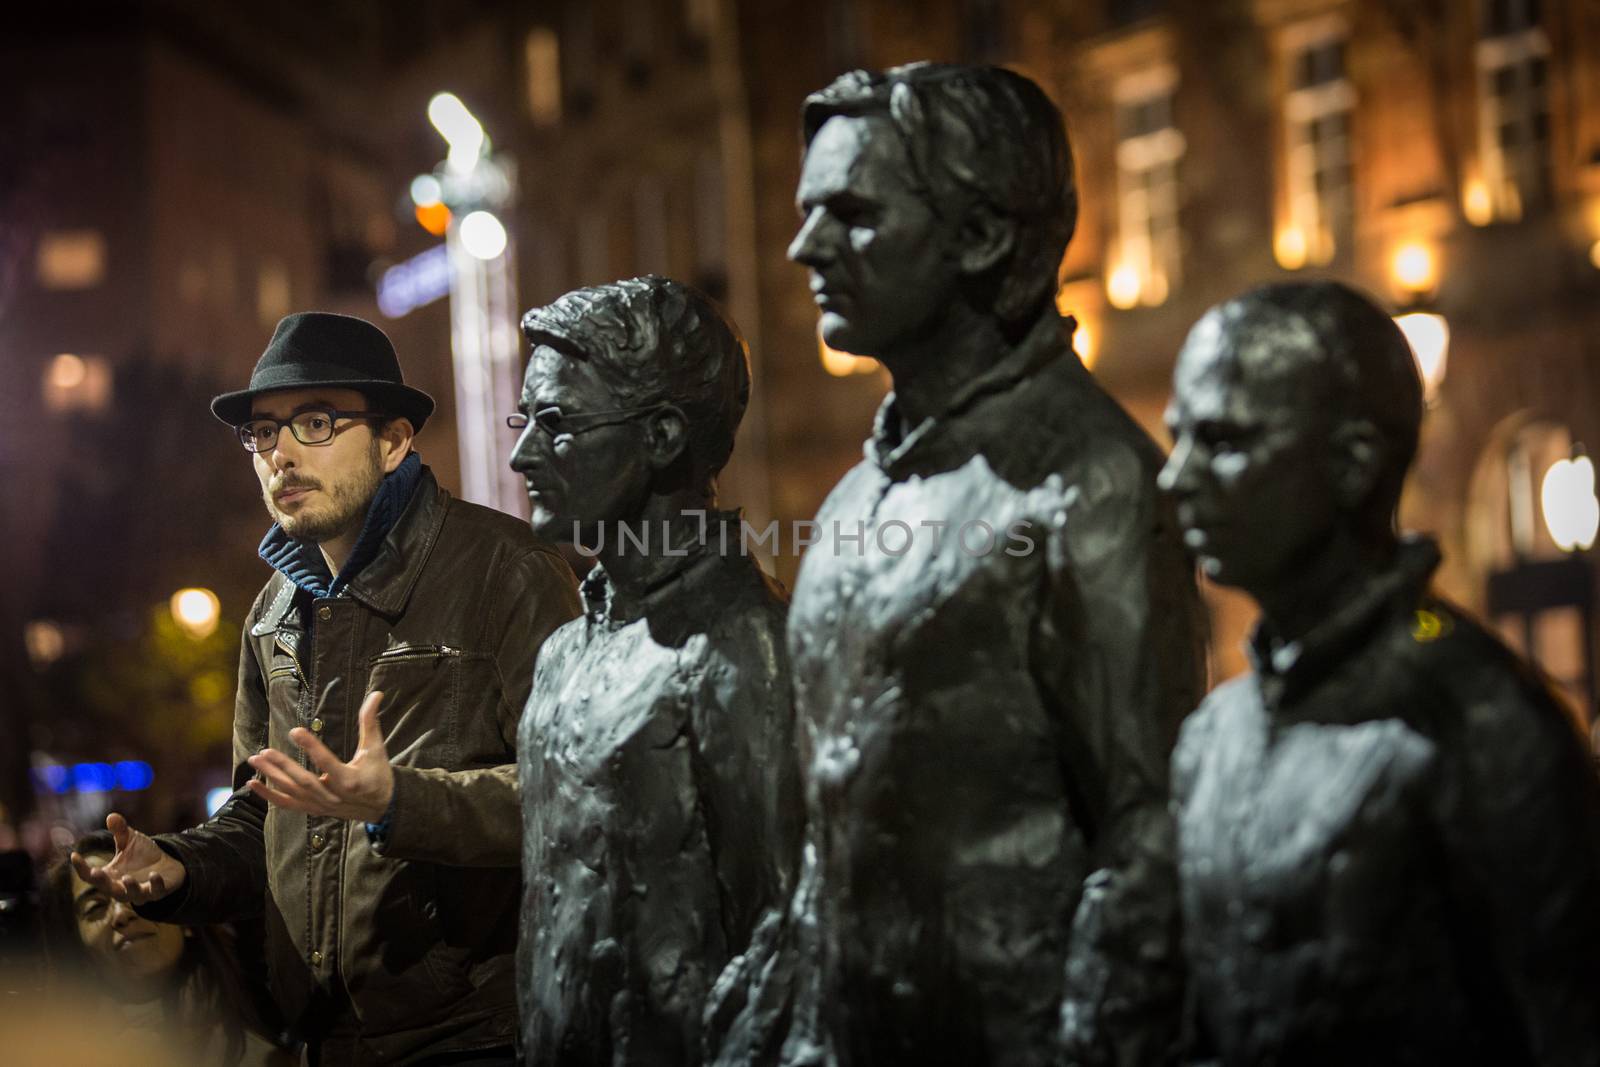 FRANCE, Strasbourg: Antoine Deltour stands on live size bronze sculpture Anything to say? of Italian artist Davide Dormino, portraying (2nd L-R) former National Security Agency (NSA) contractor and whistleblower Edward Snowden, WikiLeaks founder Julian Assange and former US soldier Chelsea Manning convicted of violations of the Espionage Act, in Strasbourg on November 17, 2015. The sculpture aims to be an interactive public art project for the freedom of speech. He and another former employees of accountancy giant PwC go on trial in Luxembourg on April 26, 2016 along with a French journalist, accused of leaking details of corporate tax deals that have fueled global demands for reform.